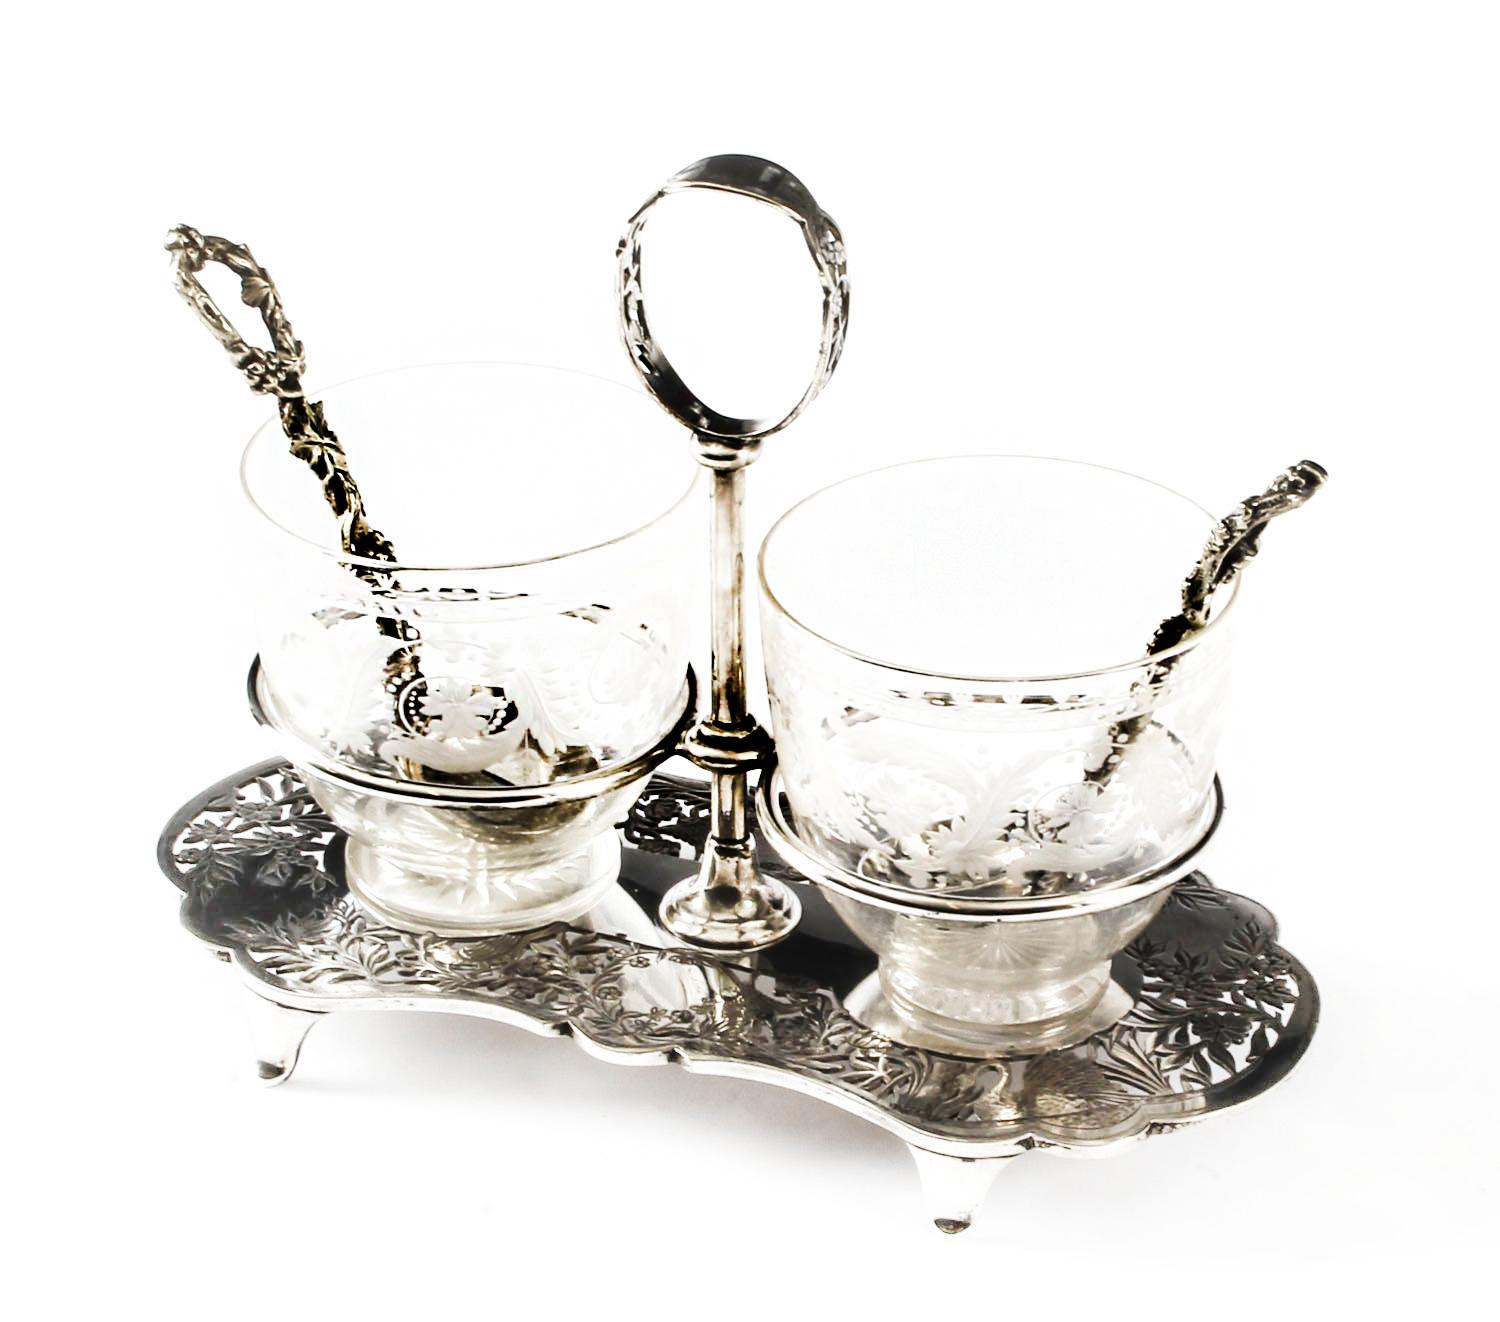 This is a delightful antique English Victorian neoclassical silver plated and etched glass strawberry & cream set circa 1870 in date.
 
This splendid set features beautiful etched glass bowls on a fitted Stand decorated with pierced foliate and